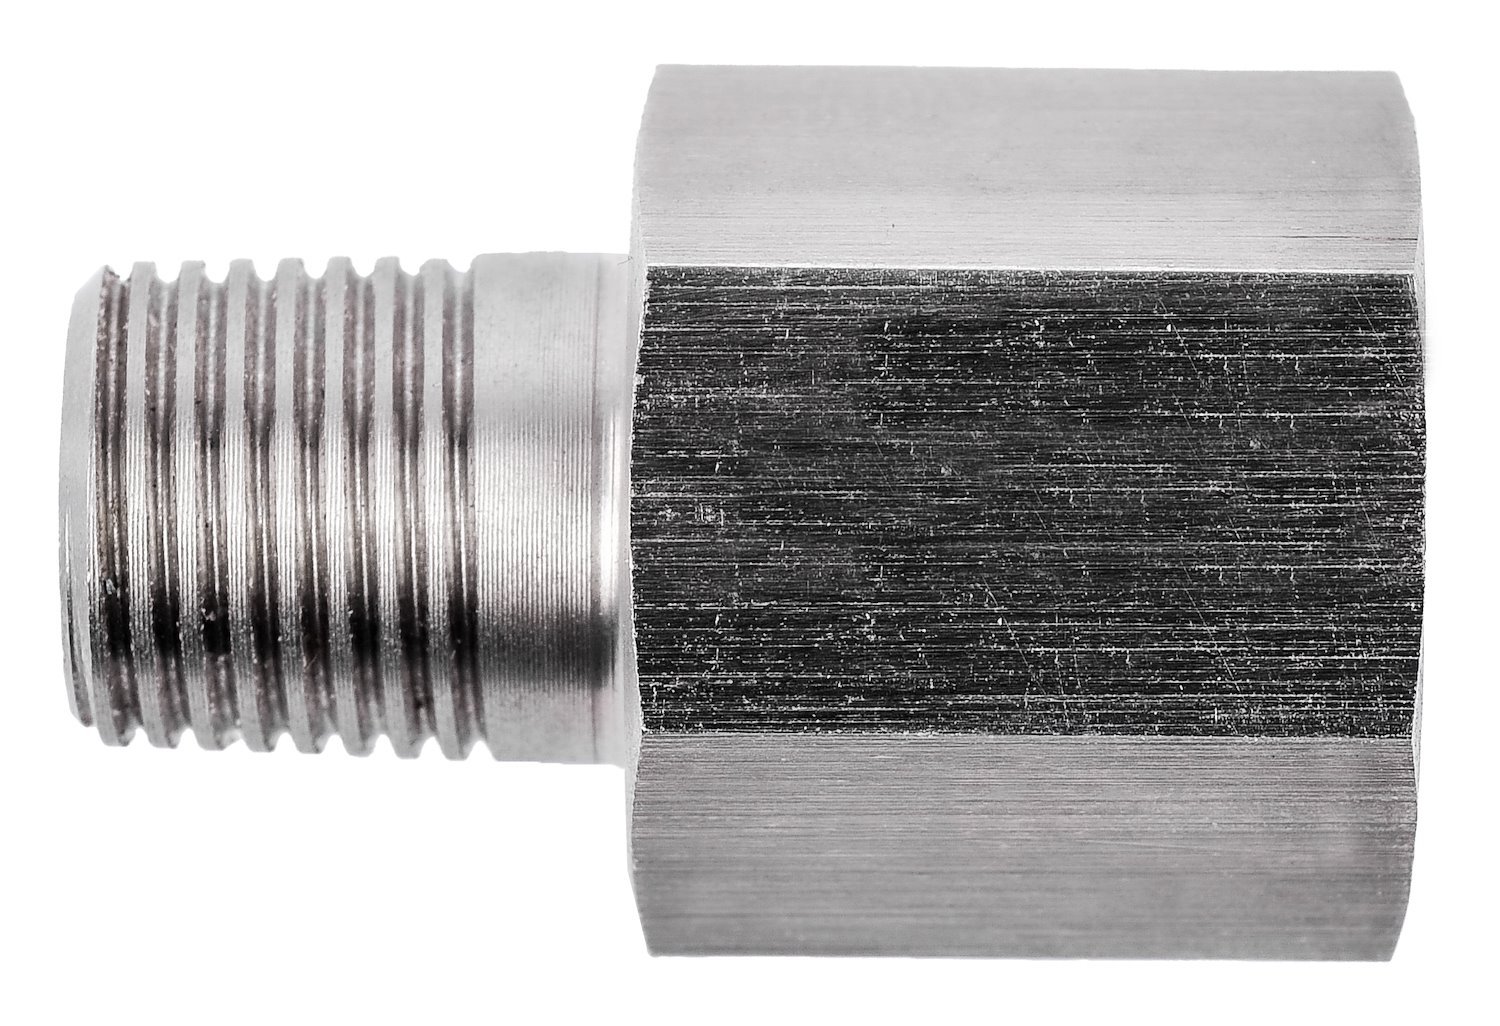 Metric BSPT to NPT Straight Adapter Fitting [1/8